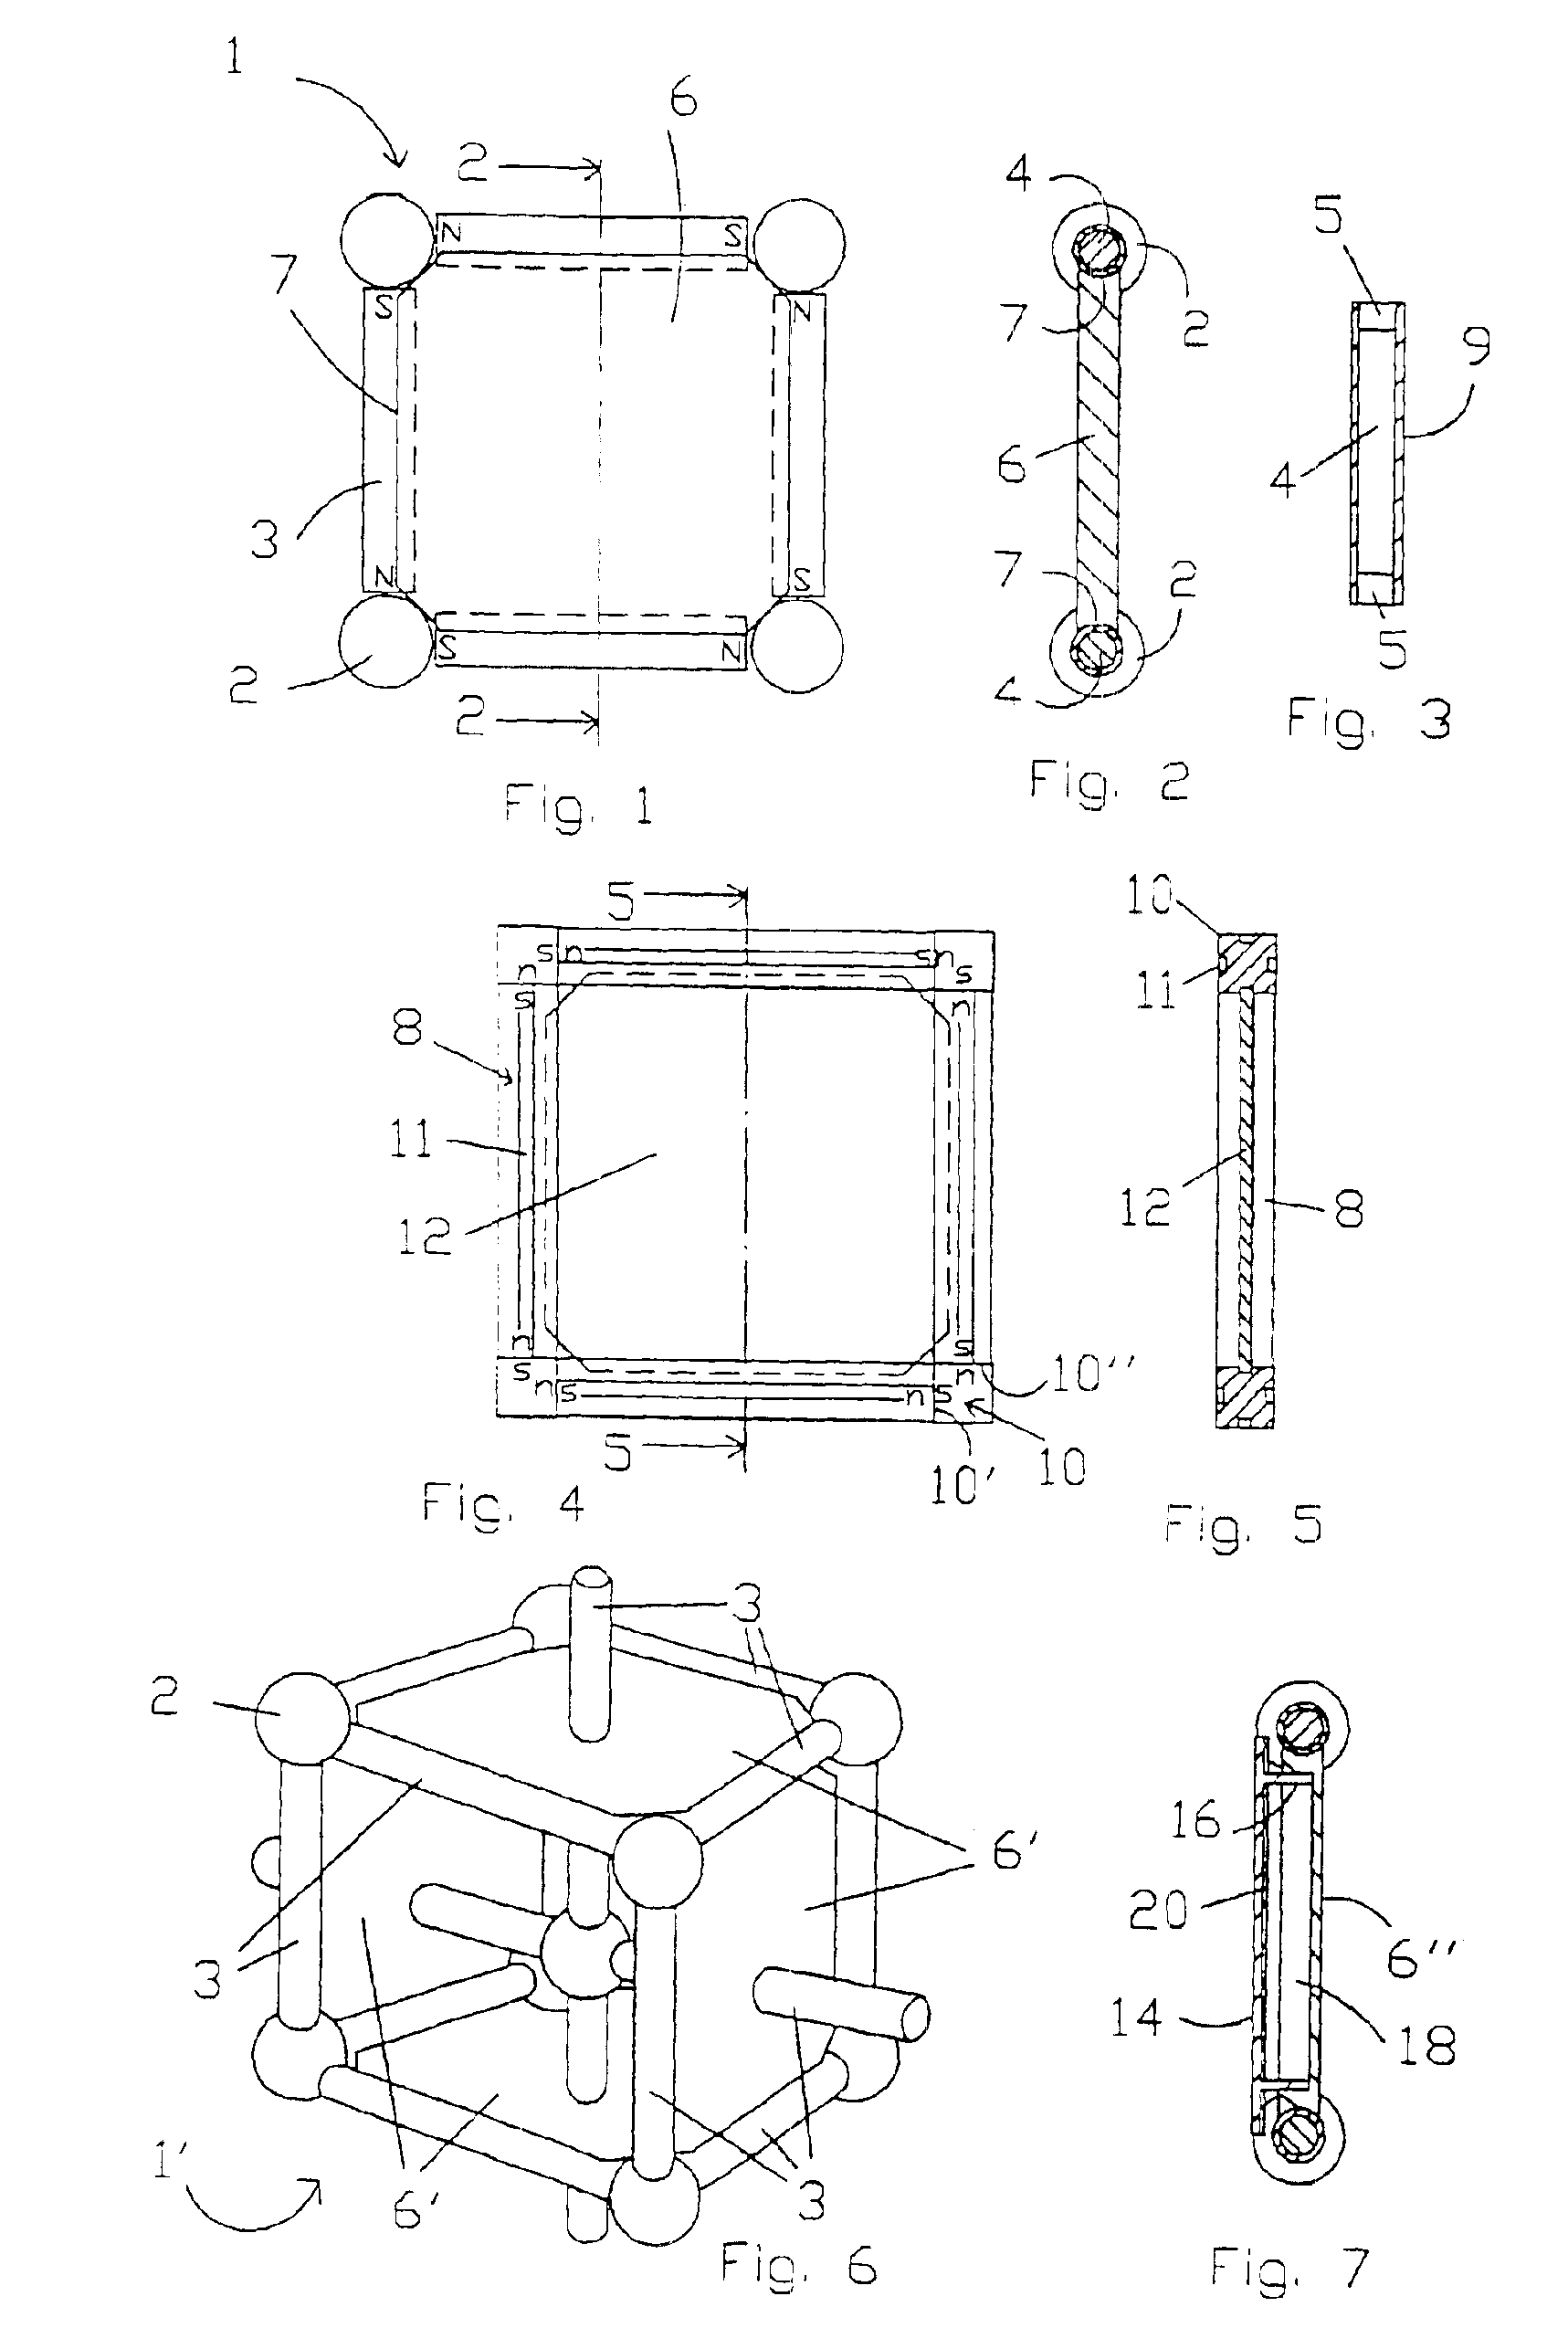 Assembly of modules with magnetic anchorage for the construction of stable grid structures